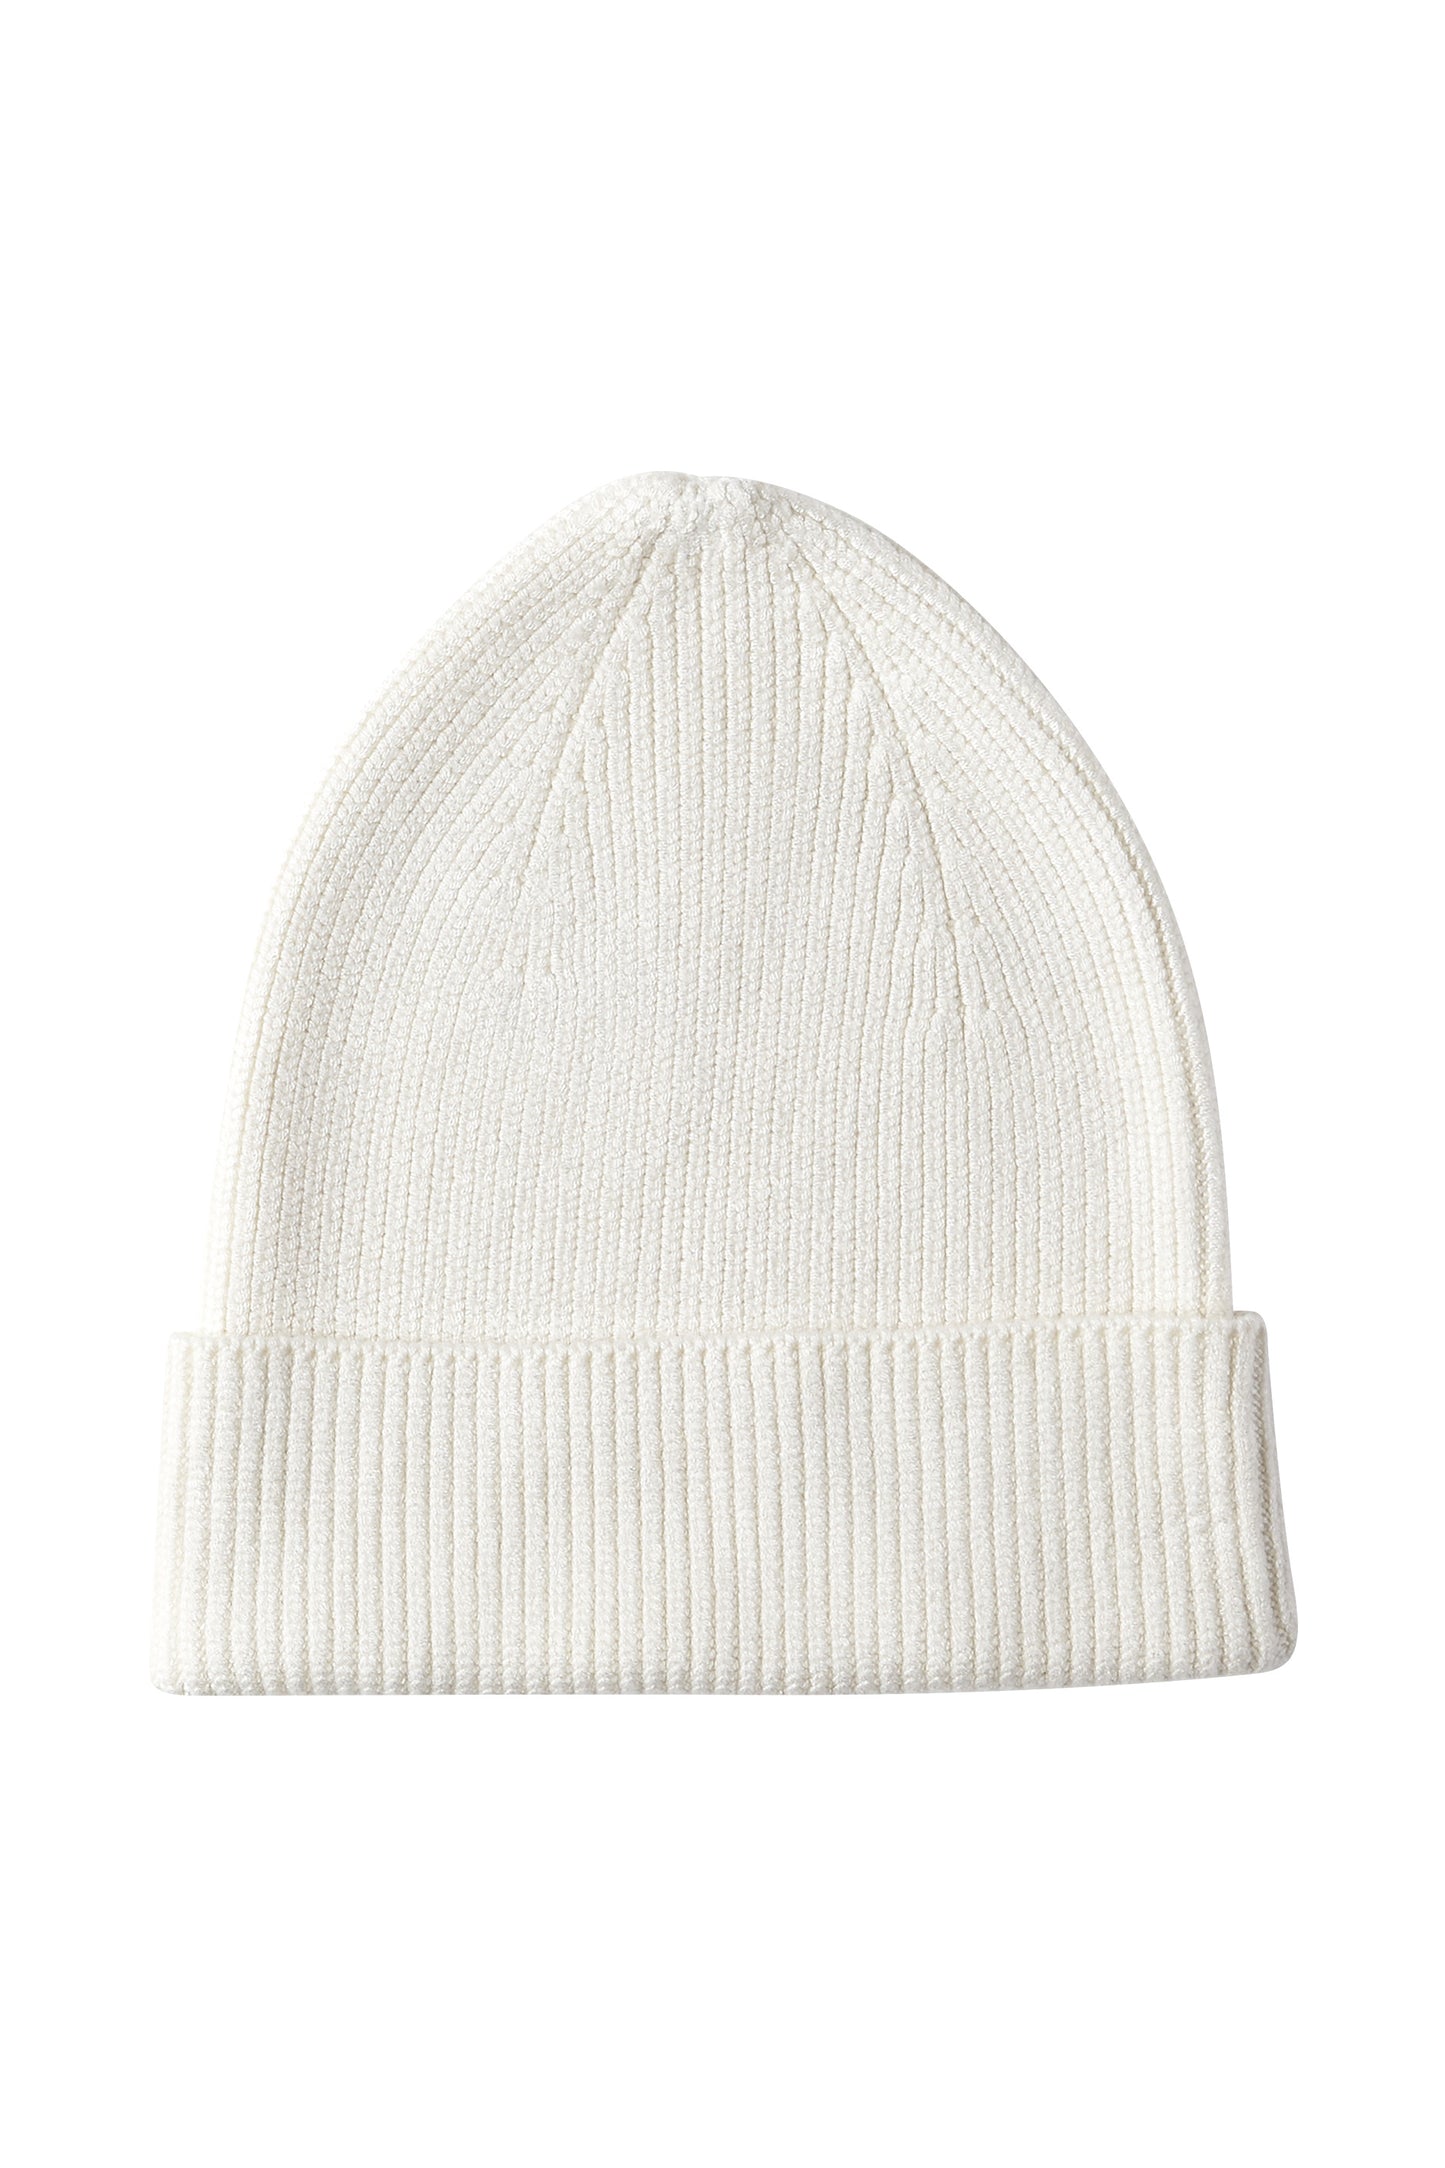 BOODY - Ribbed Knit Beanie Miesten Pipo